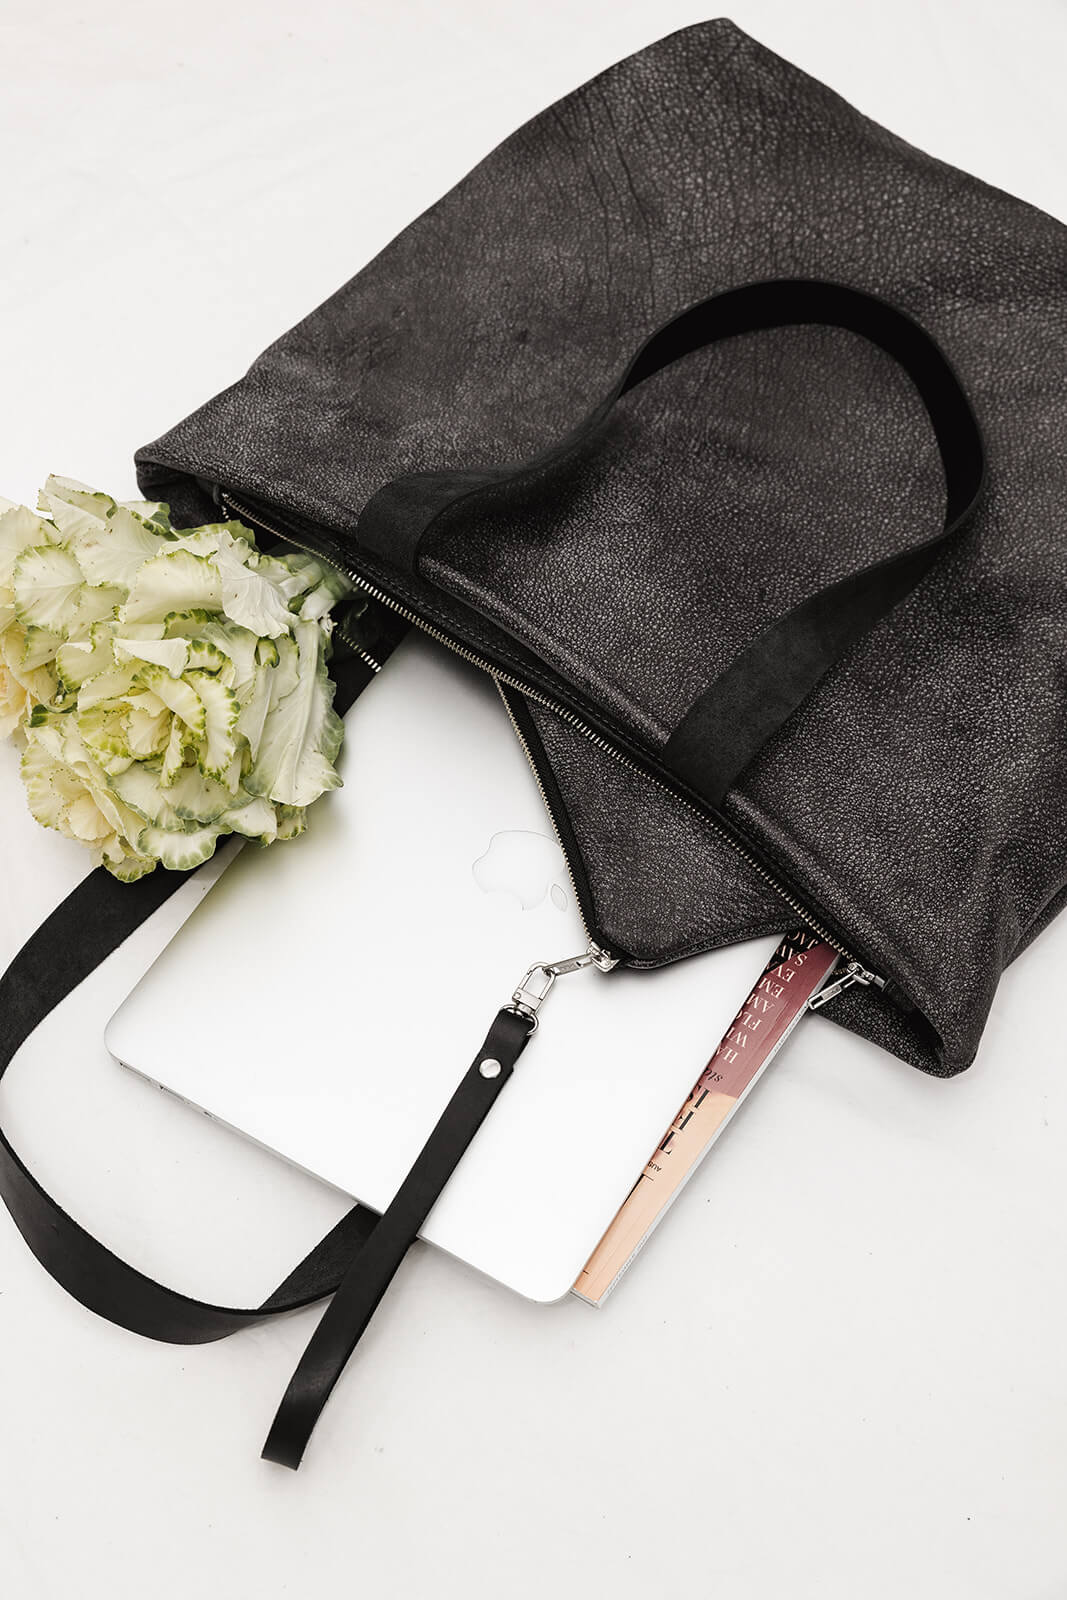 Product shot of the Ella Jackson Two-tone Grey Leather Backpack & Tote on a white background. Coming out of the bag is a bunch of cream and green flowers, an apple laptop, a magazine and a grey clutch with black wrist strap